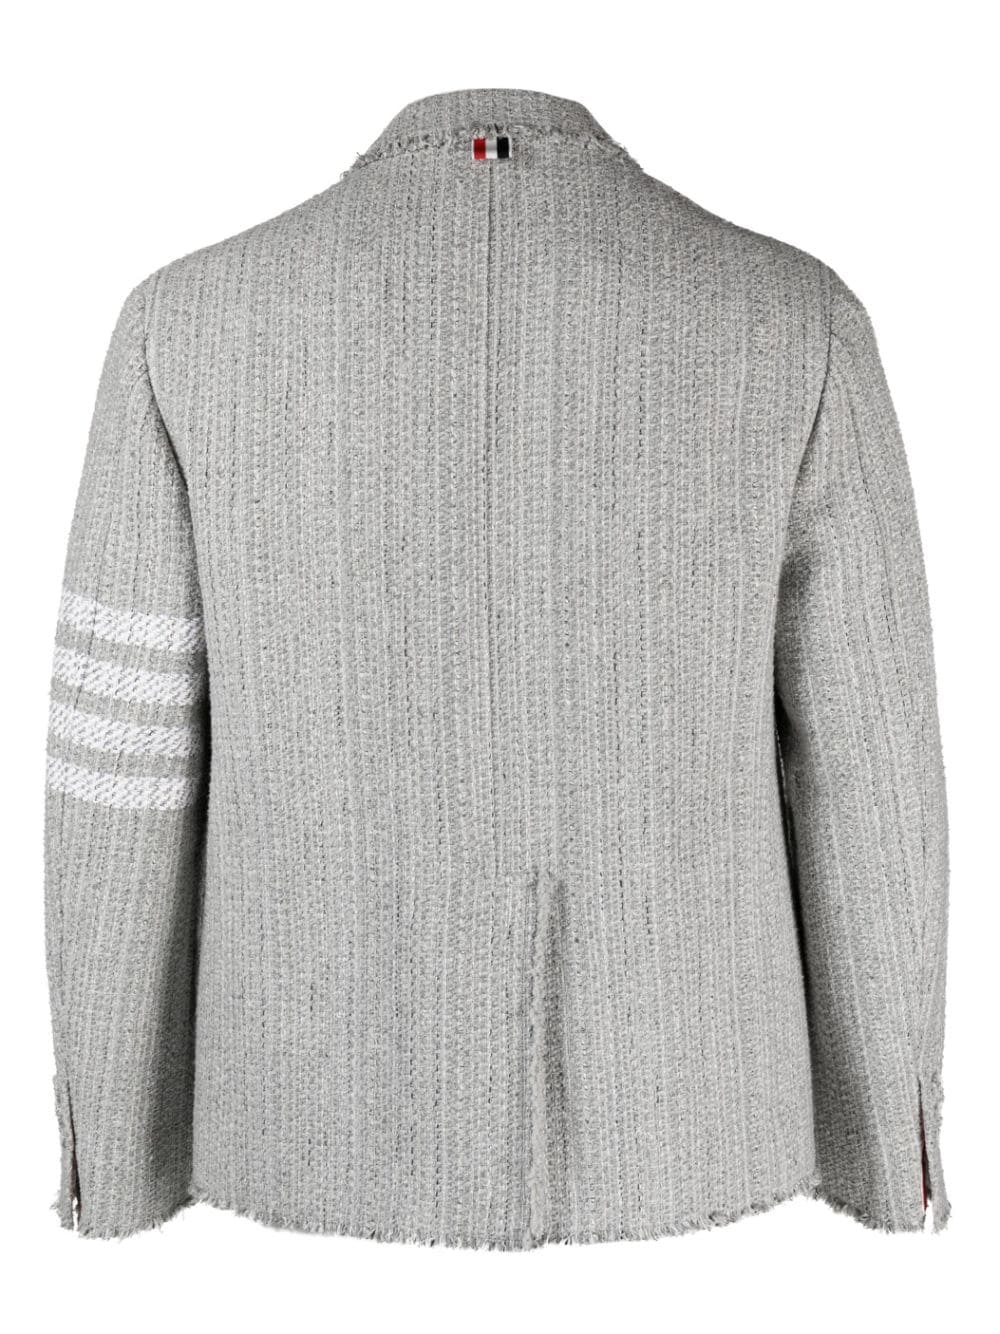 Unconstructed Fit 2 Sb S/C (Sack) W/Fray Edge In Woven 4 Bar Solid Cotton Tweed Med Grey